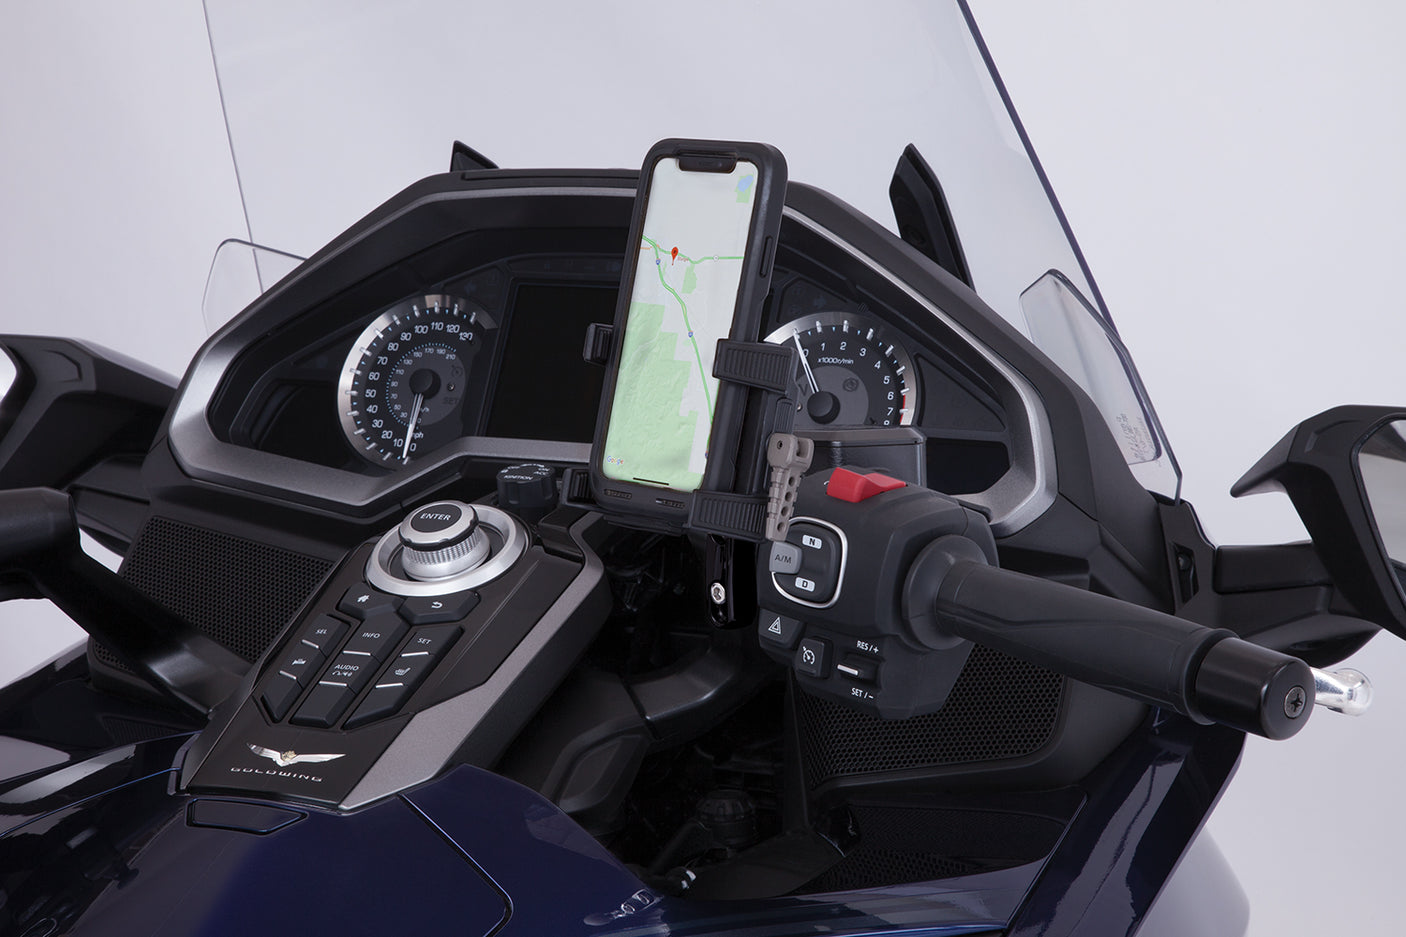 Goldstrike Smartphone Holder With Perch Mount For Honda Gold Wing